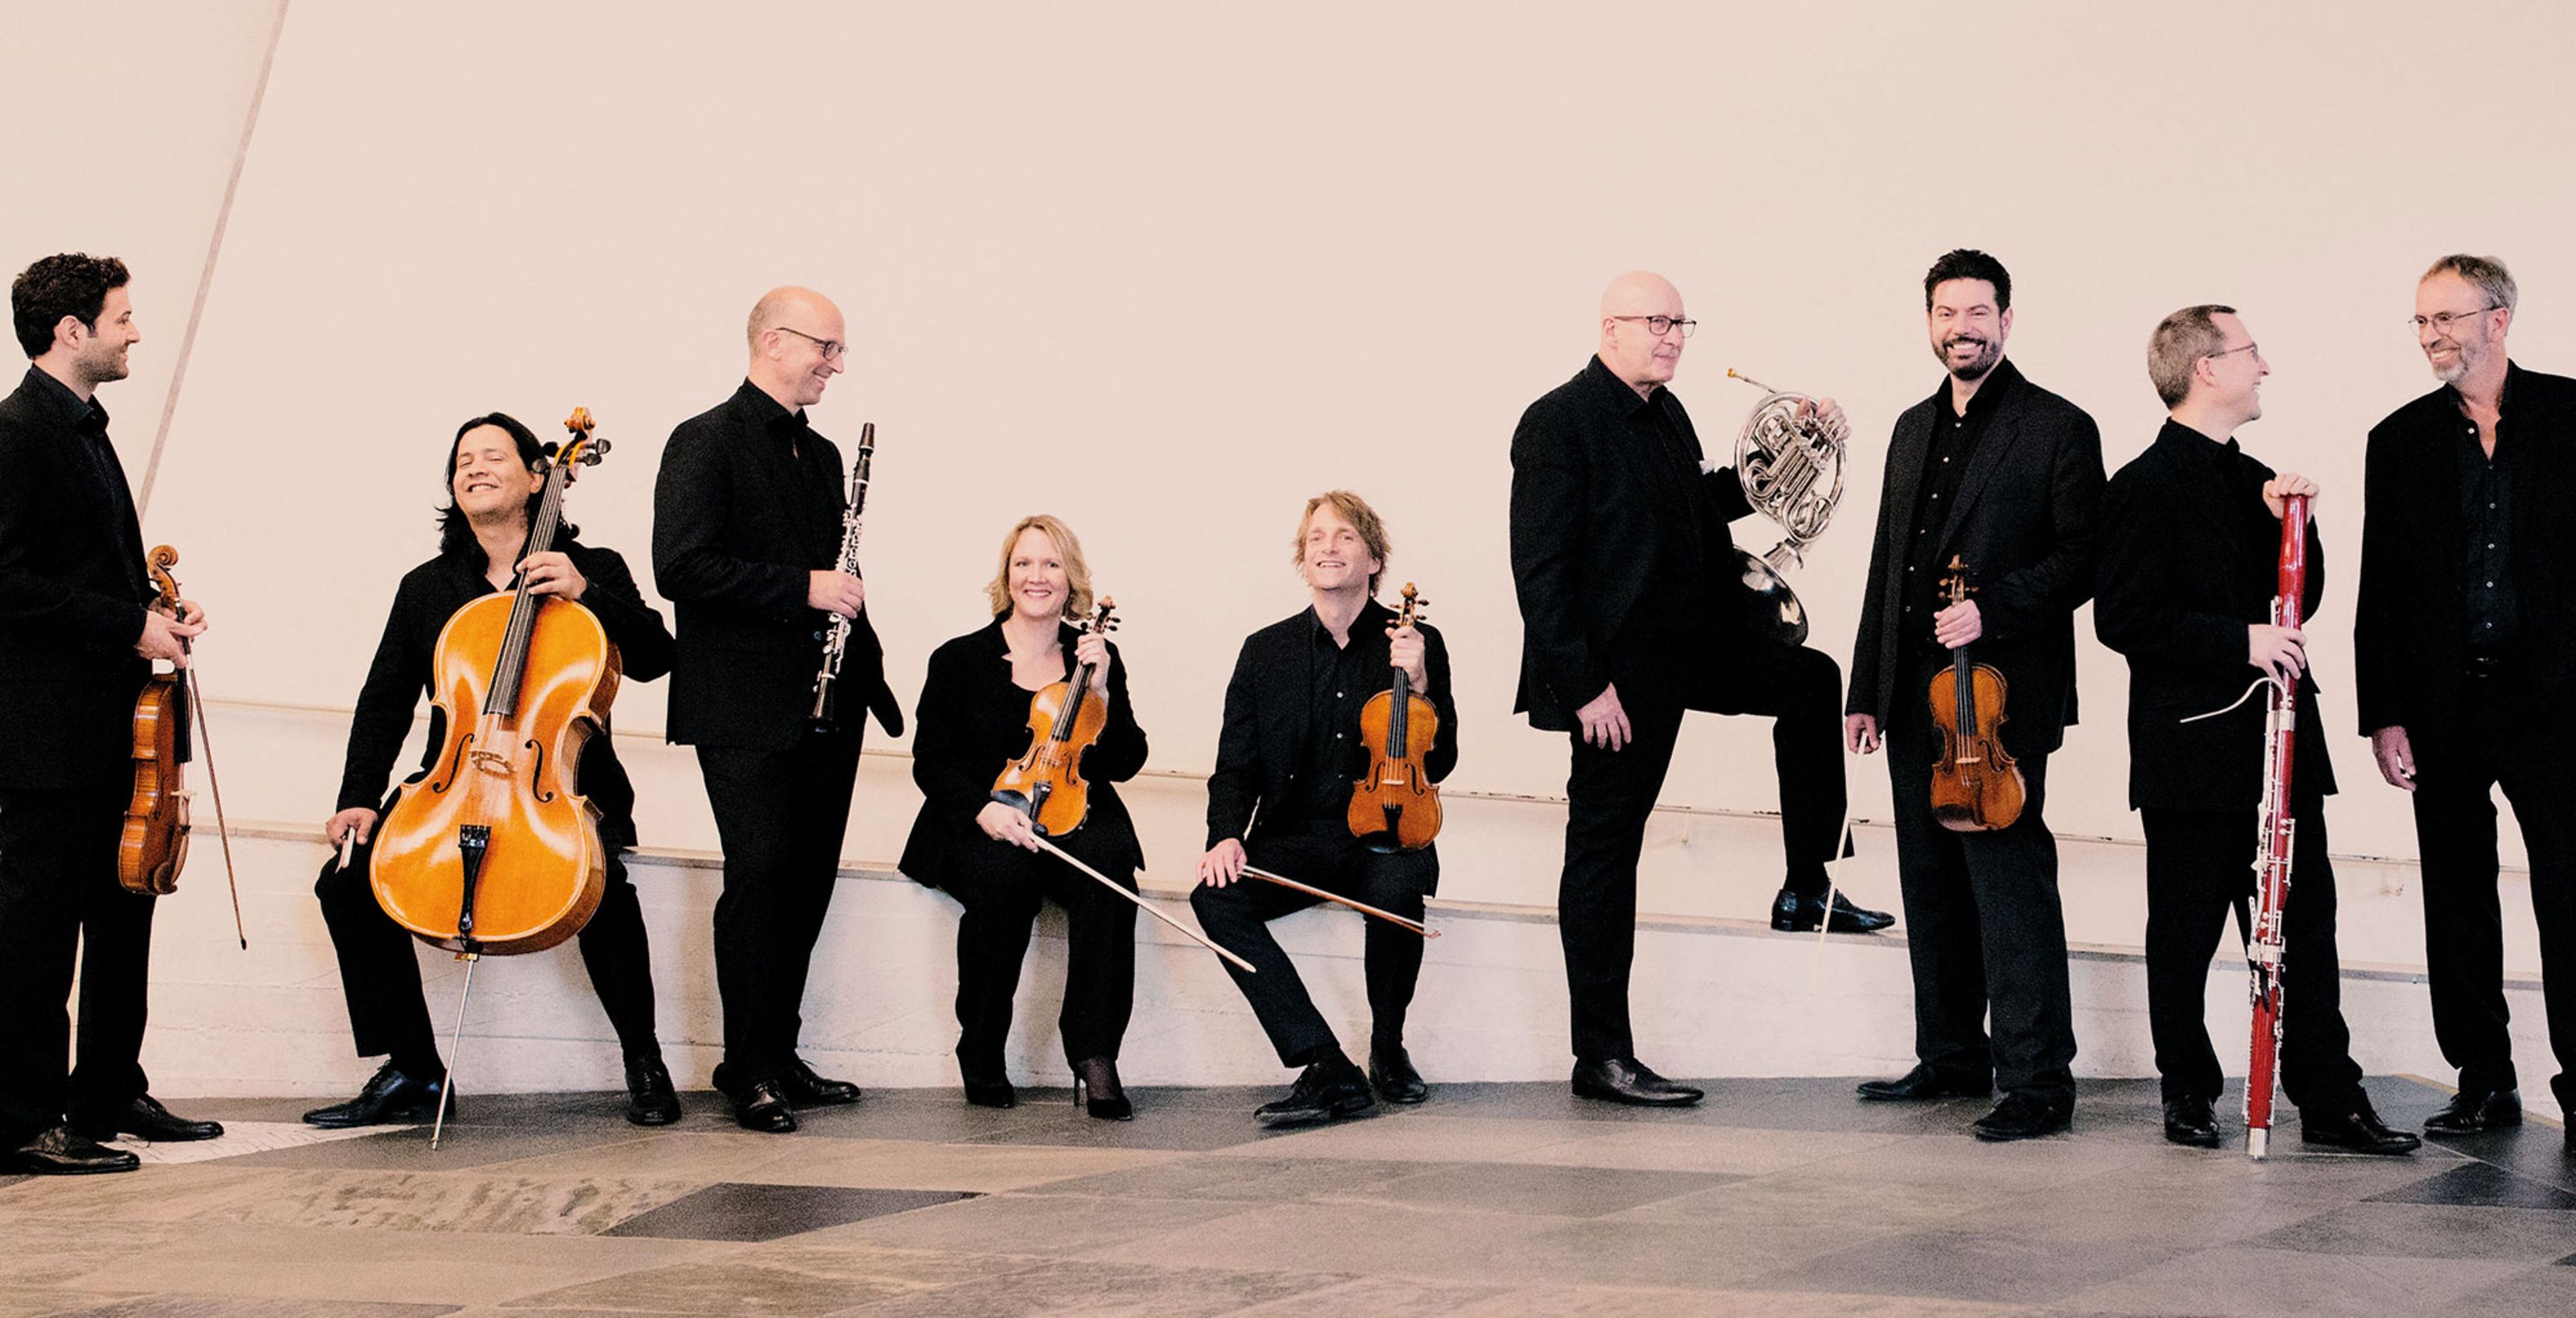 A photo of the Scharoun Ensemble Berlin with its nine members.